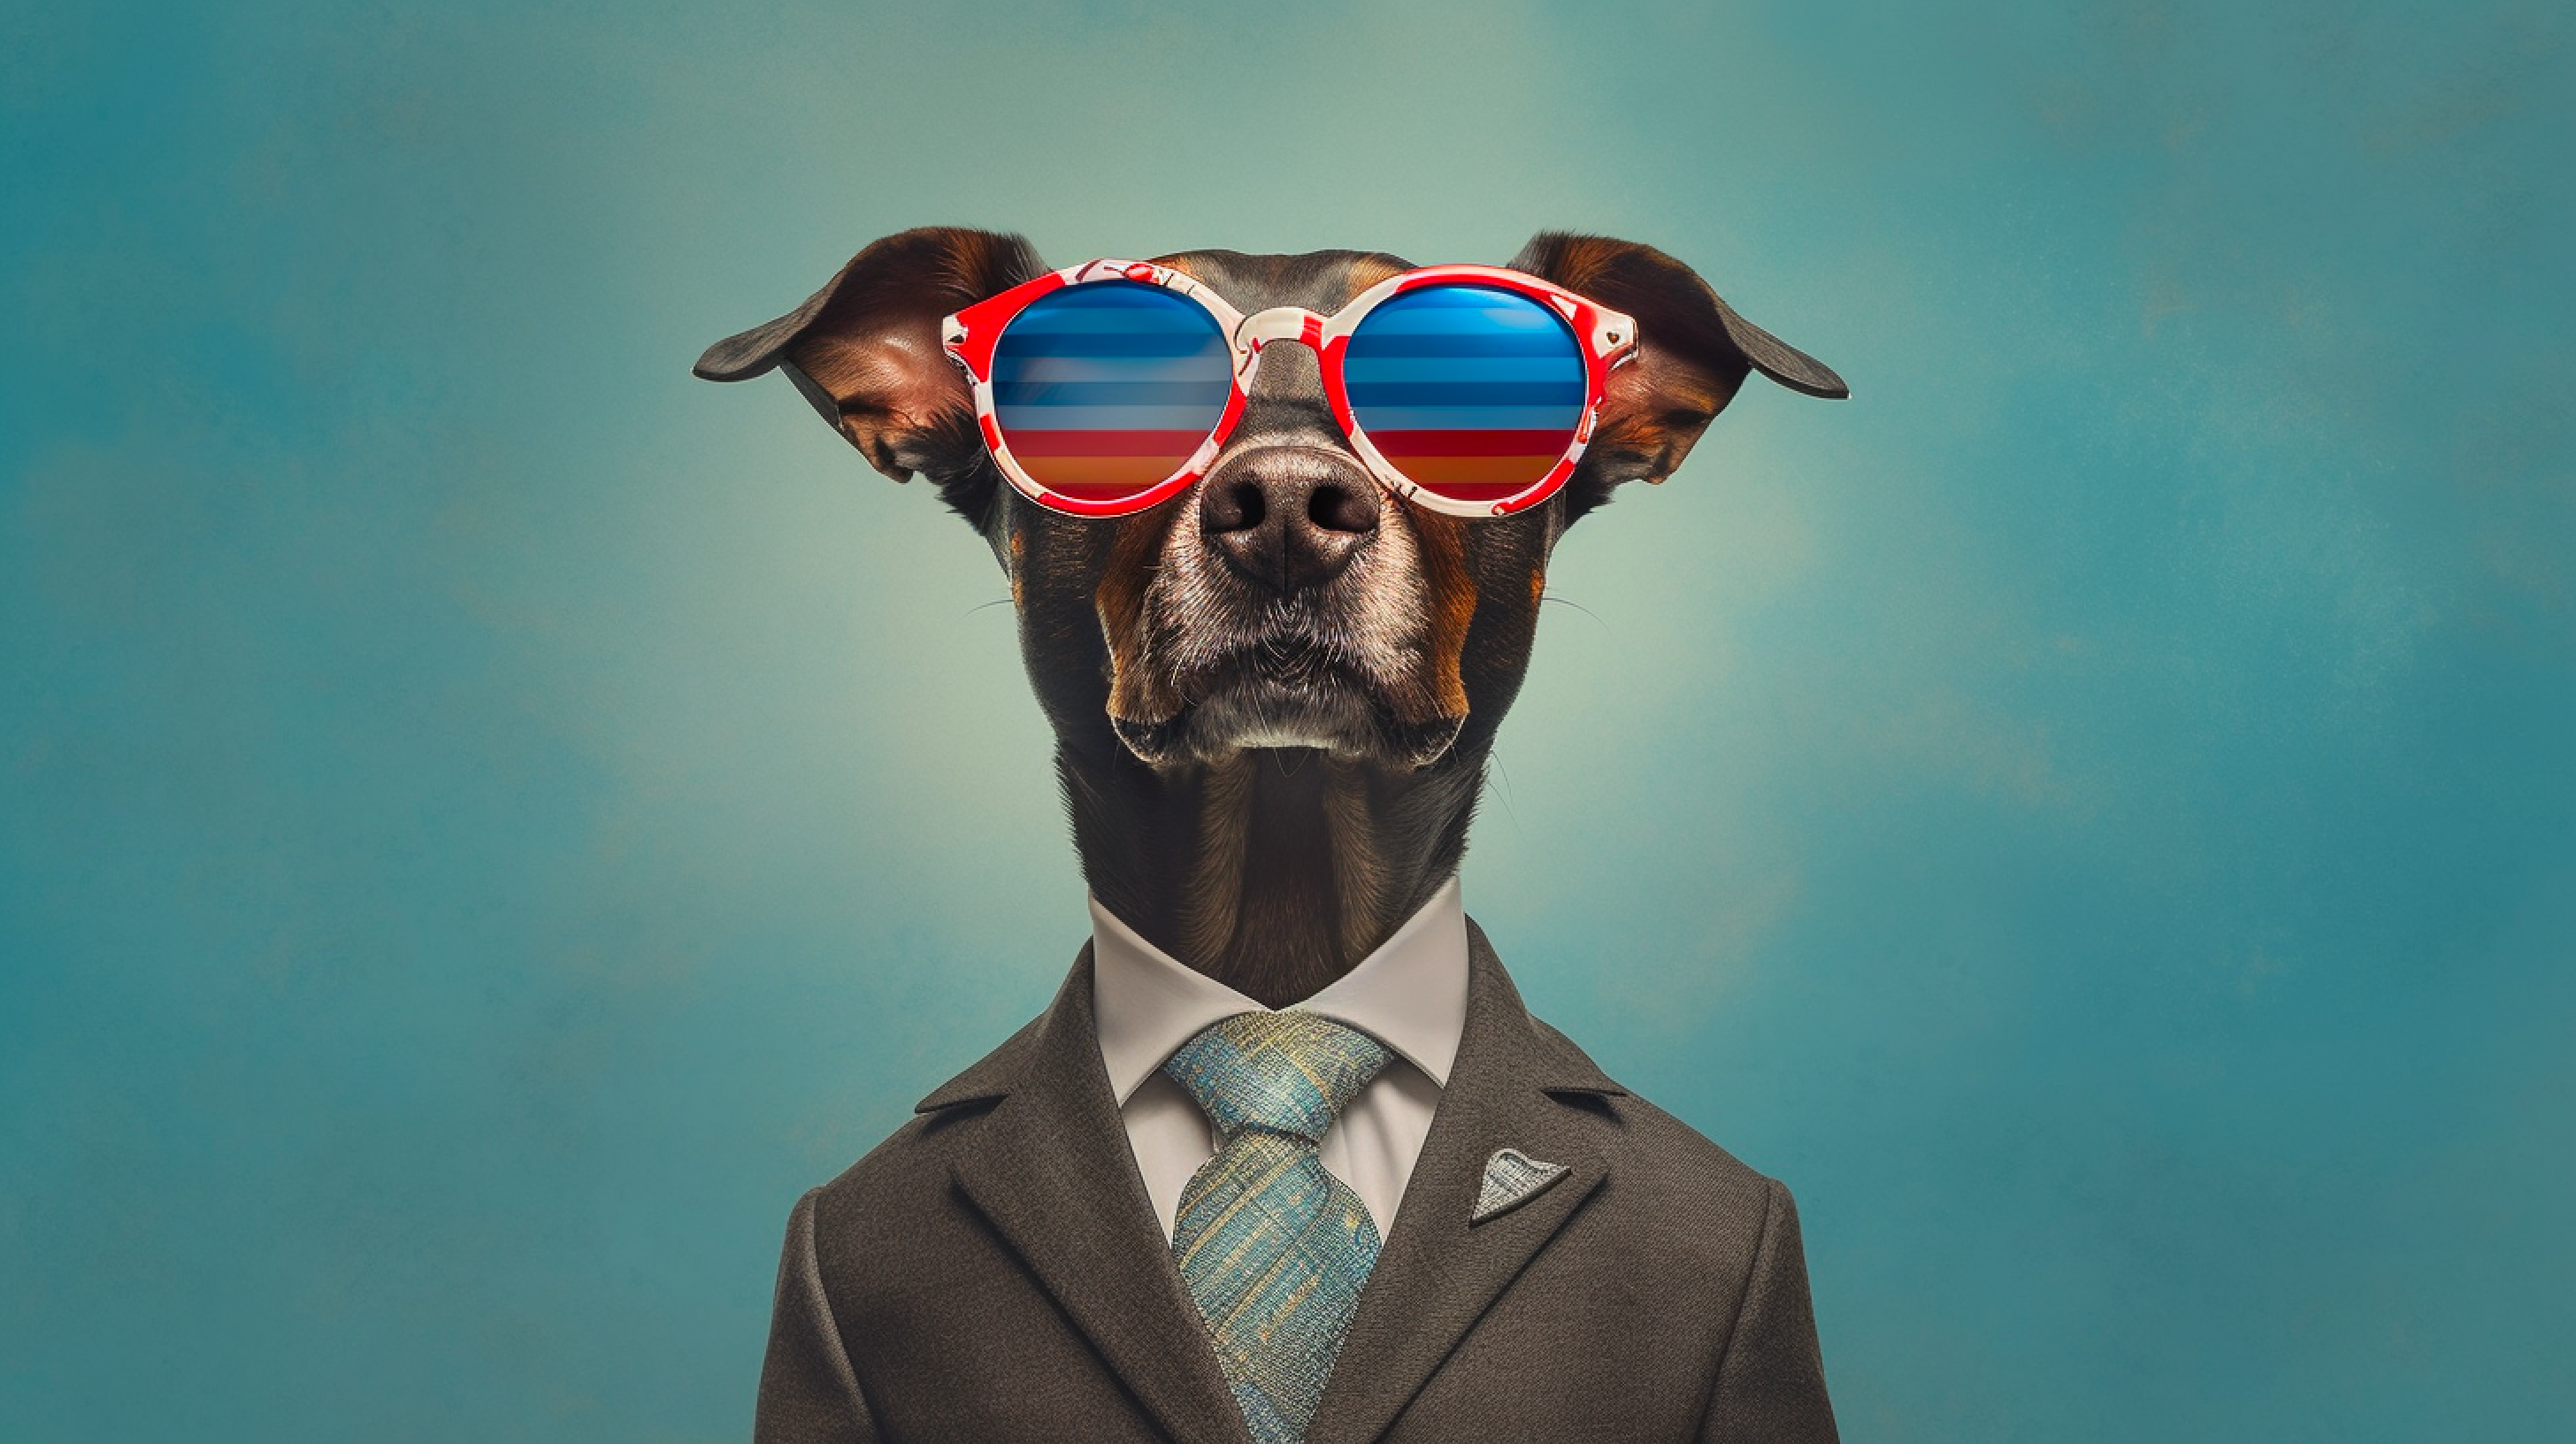 AI-generated image of a brown dog wearing a suit with sunglasses. The glasses have lenses that are shaded blue and red.